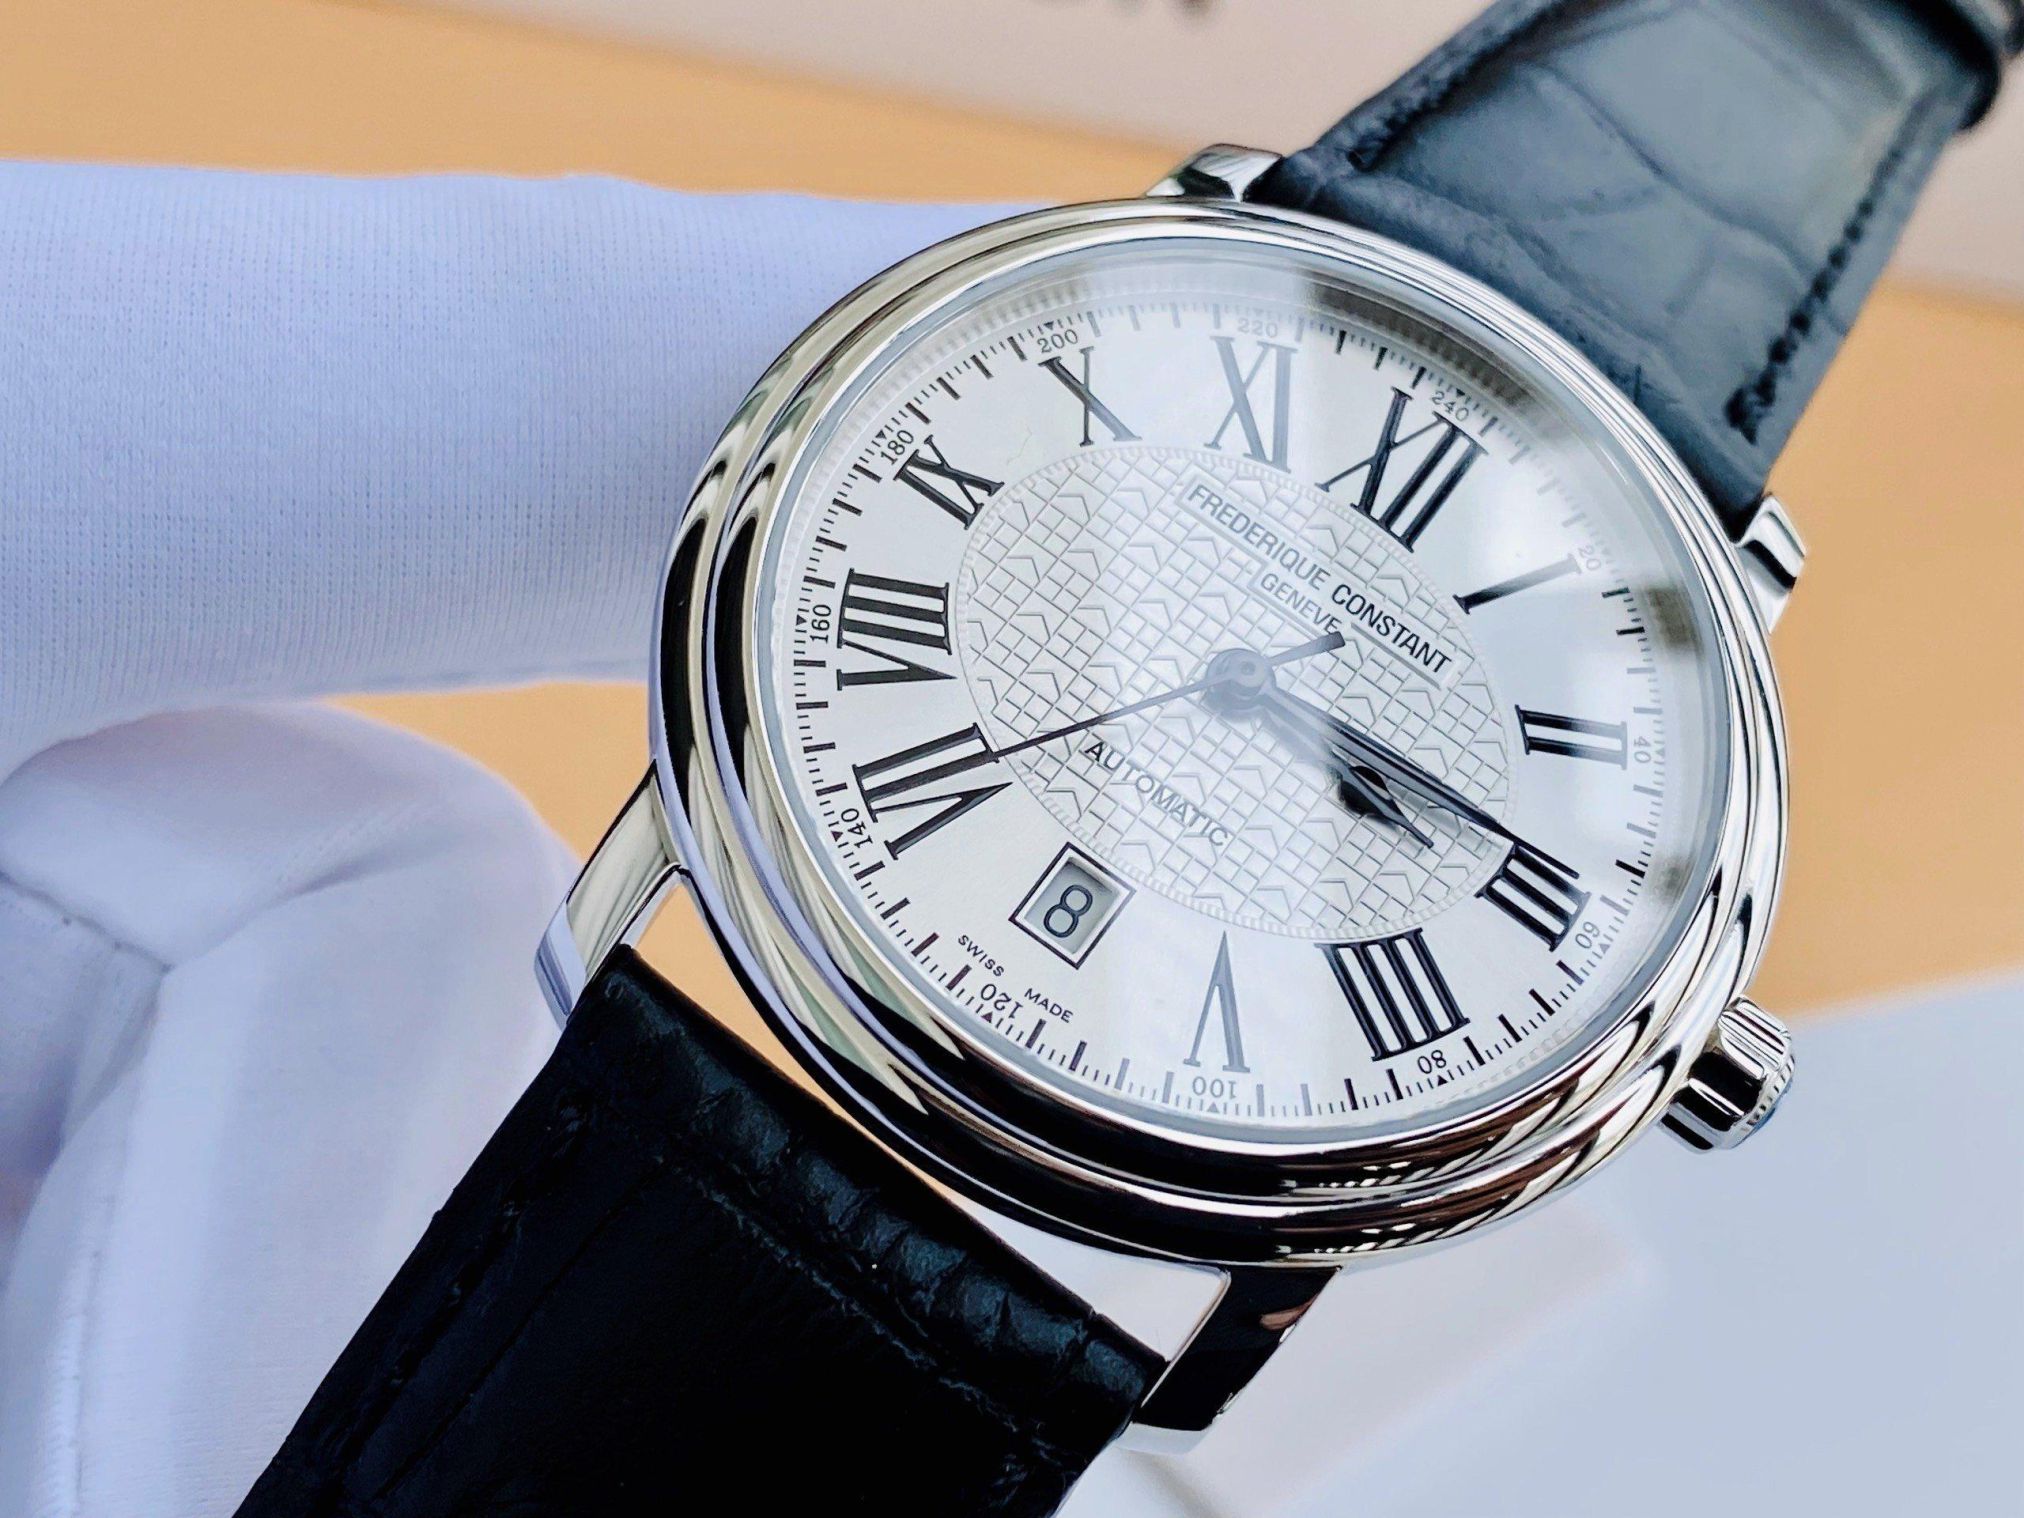 Frederique Constant Geneve FC-303M4P6 - Sự hoàn hảo trong từng chi tiết